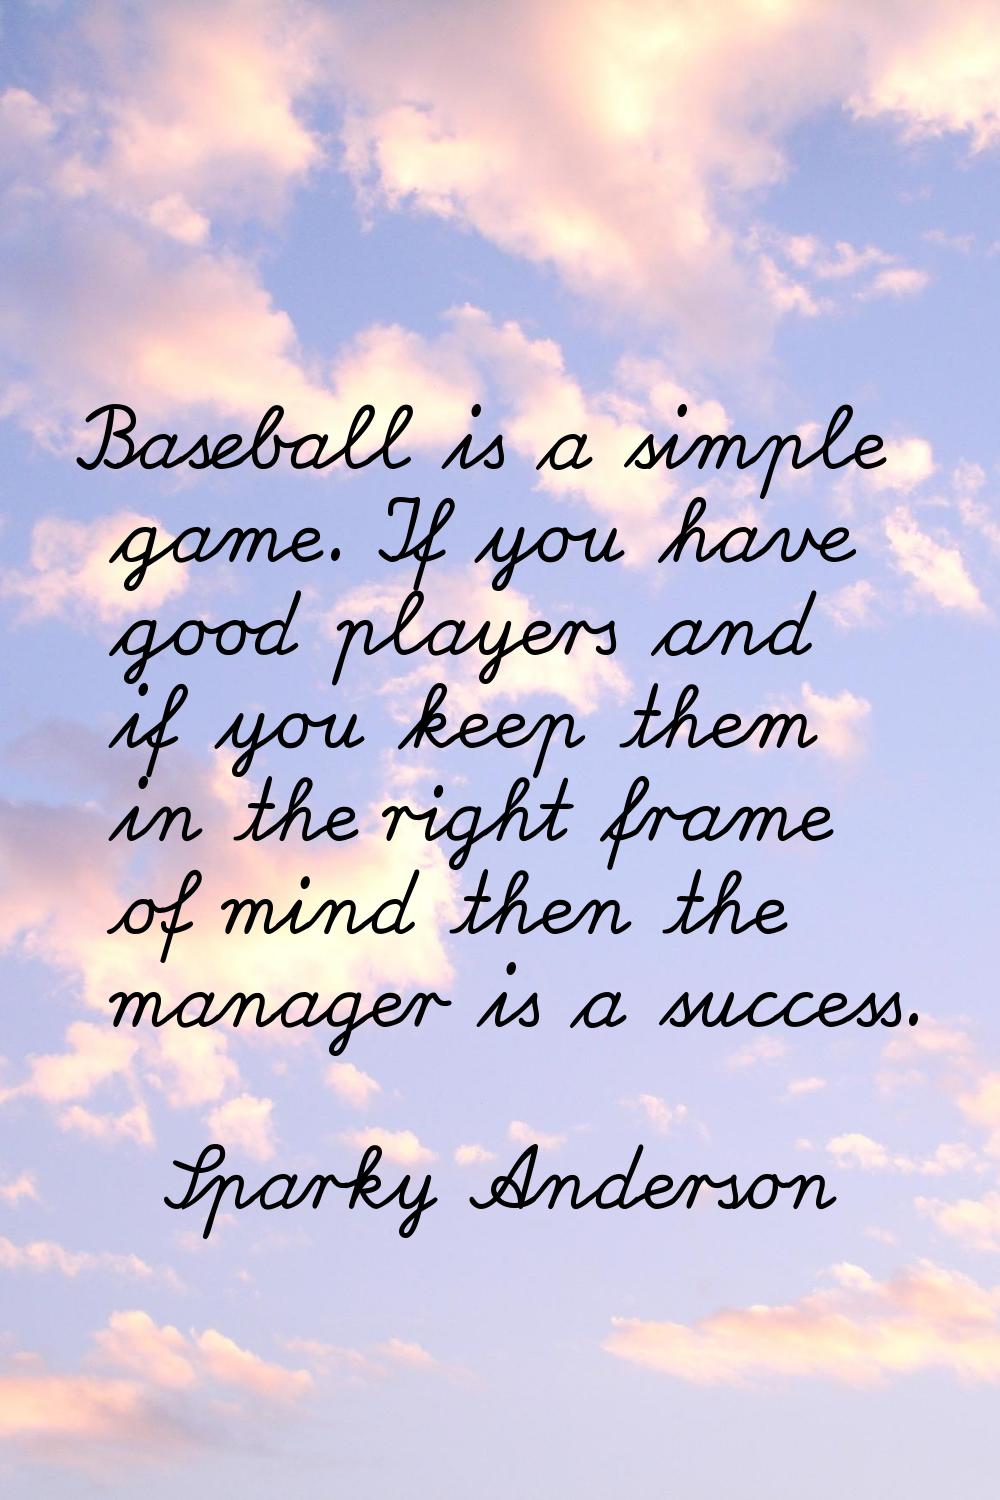 Baseball is a simple game. If you have good players and if you keep them in the right frame of mind